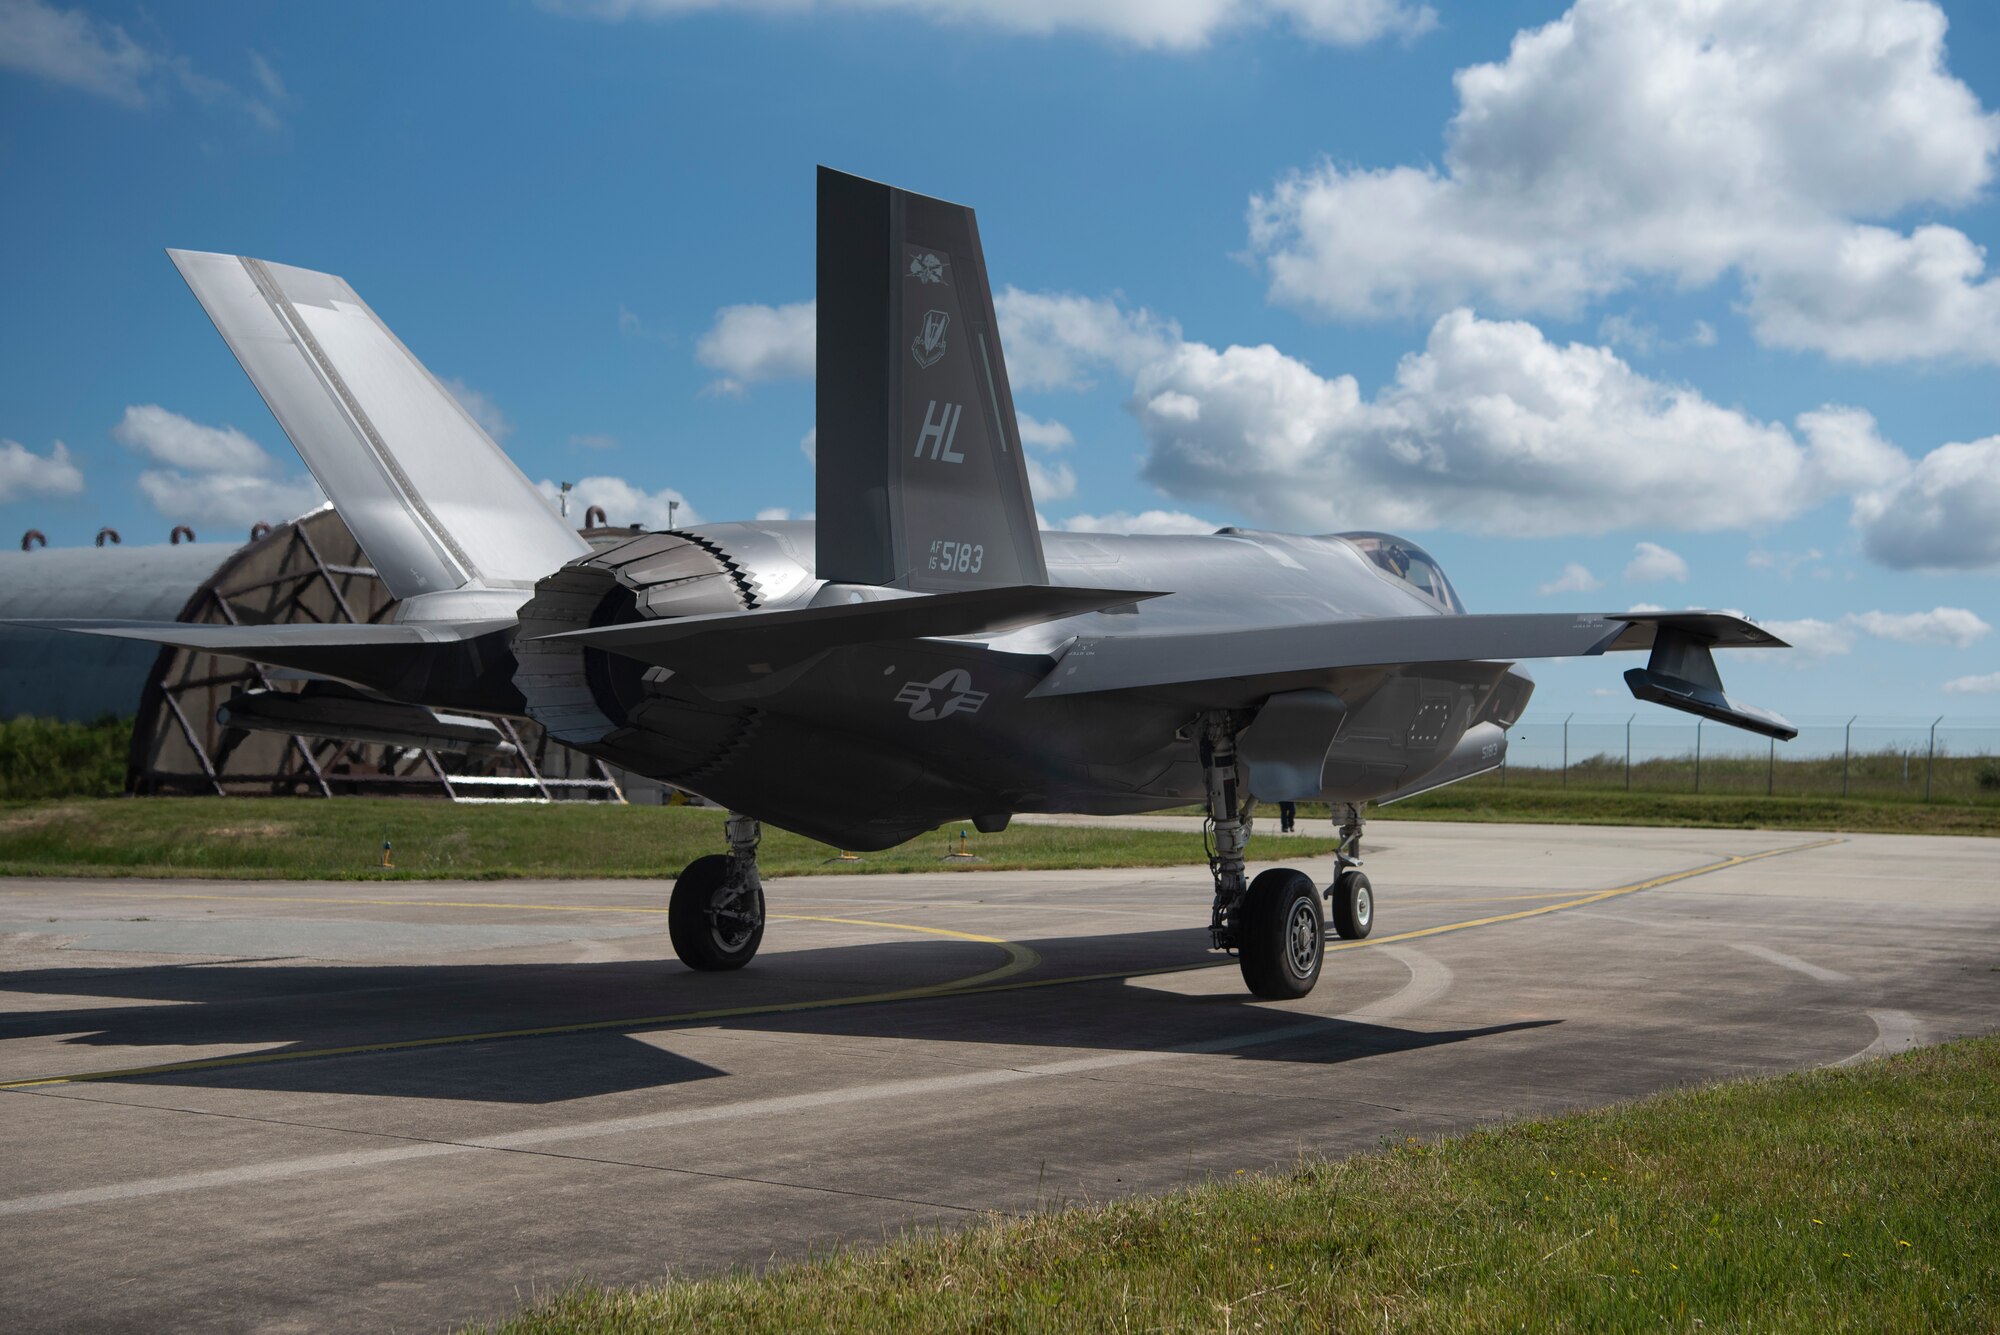 A U.S. Air Force F-35A Lightning II fighter aircraft, assigned to the 421st Fighter Squadron, Hill Air Force Base, Utah, taxis on the flightline at Spangdahlem Air Base, Germany, June 11, 2019. Multiple F-35s came to the European theater as part of a Theater Security Package. Their presence in the European theater underscores the U.S.'s ability to deter and respond to potential threats. (U.S. Air Force photo by Airman 1st Class Valerie Seelye)